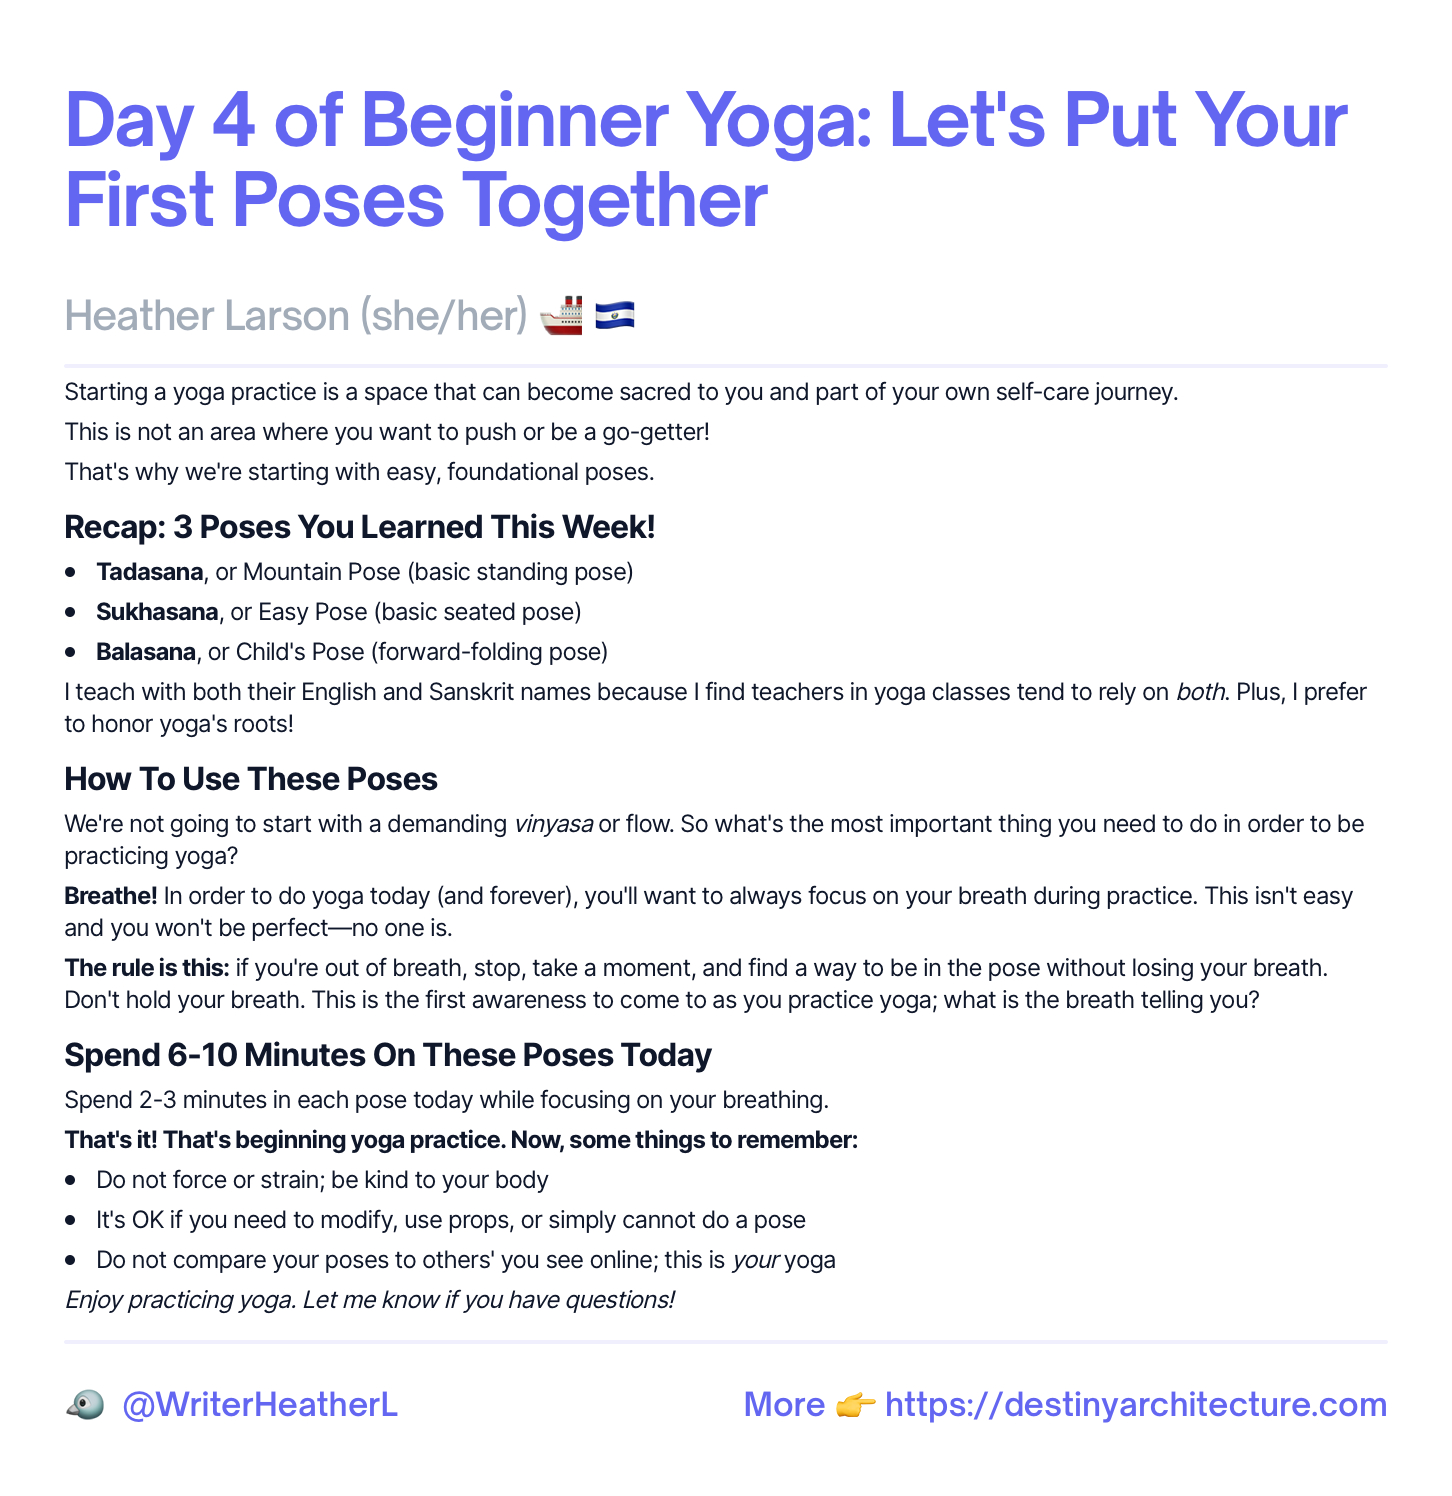 Day 4 Beginner Yoga: Safety & How To Practice